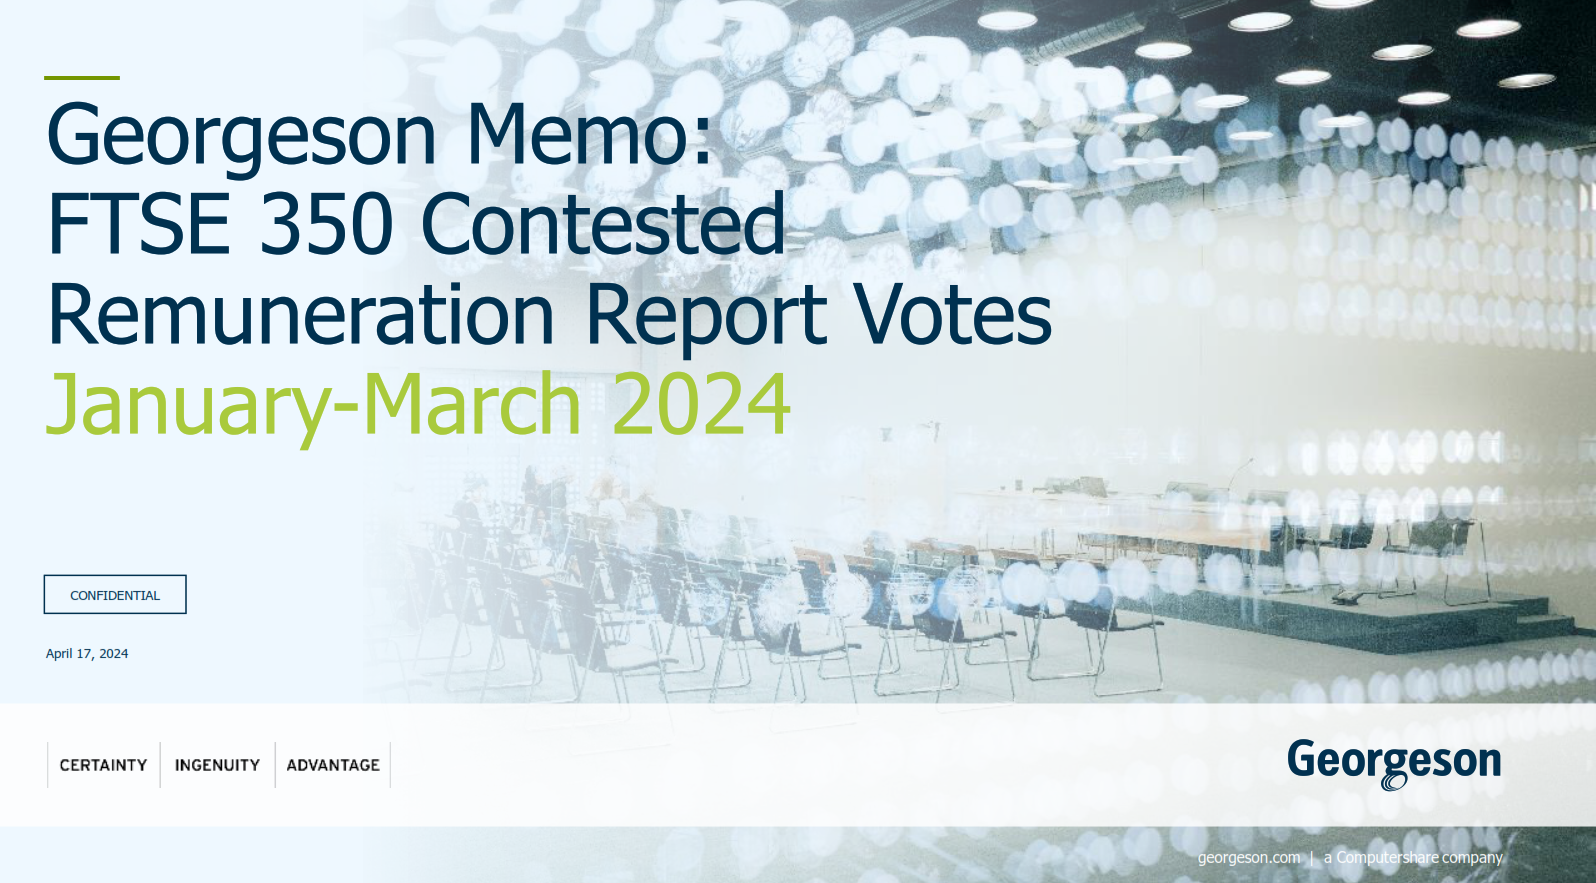 Georgeson Memo: FTSE 350 Contested Remuneration Report Votes. January-March 2024.